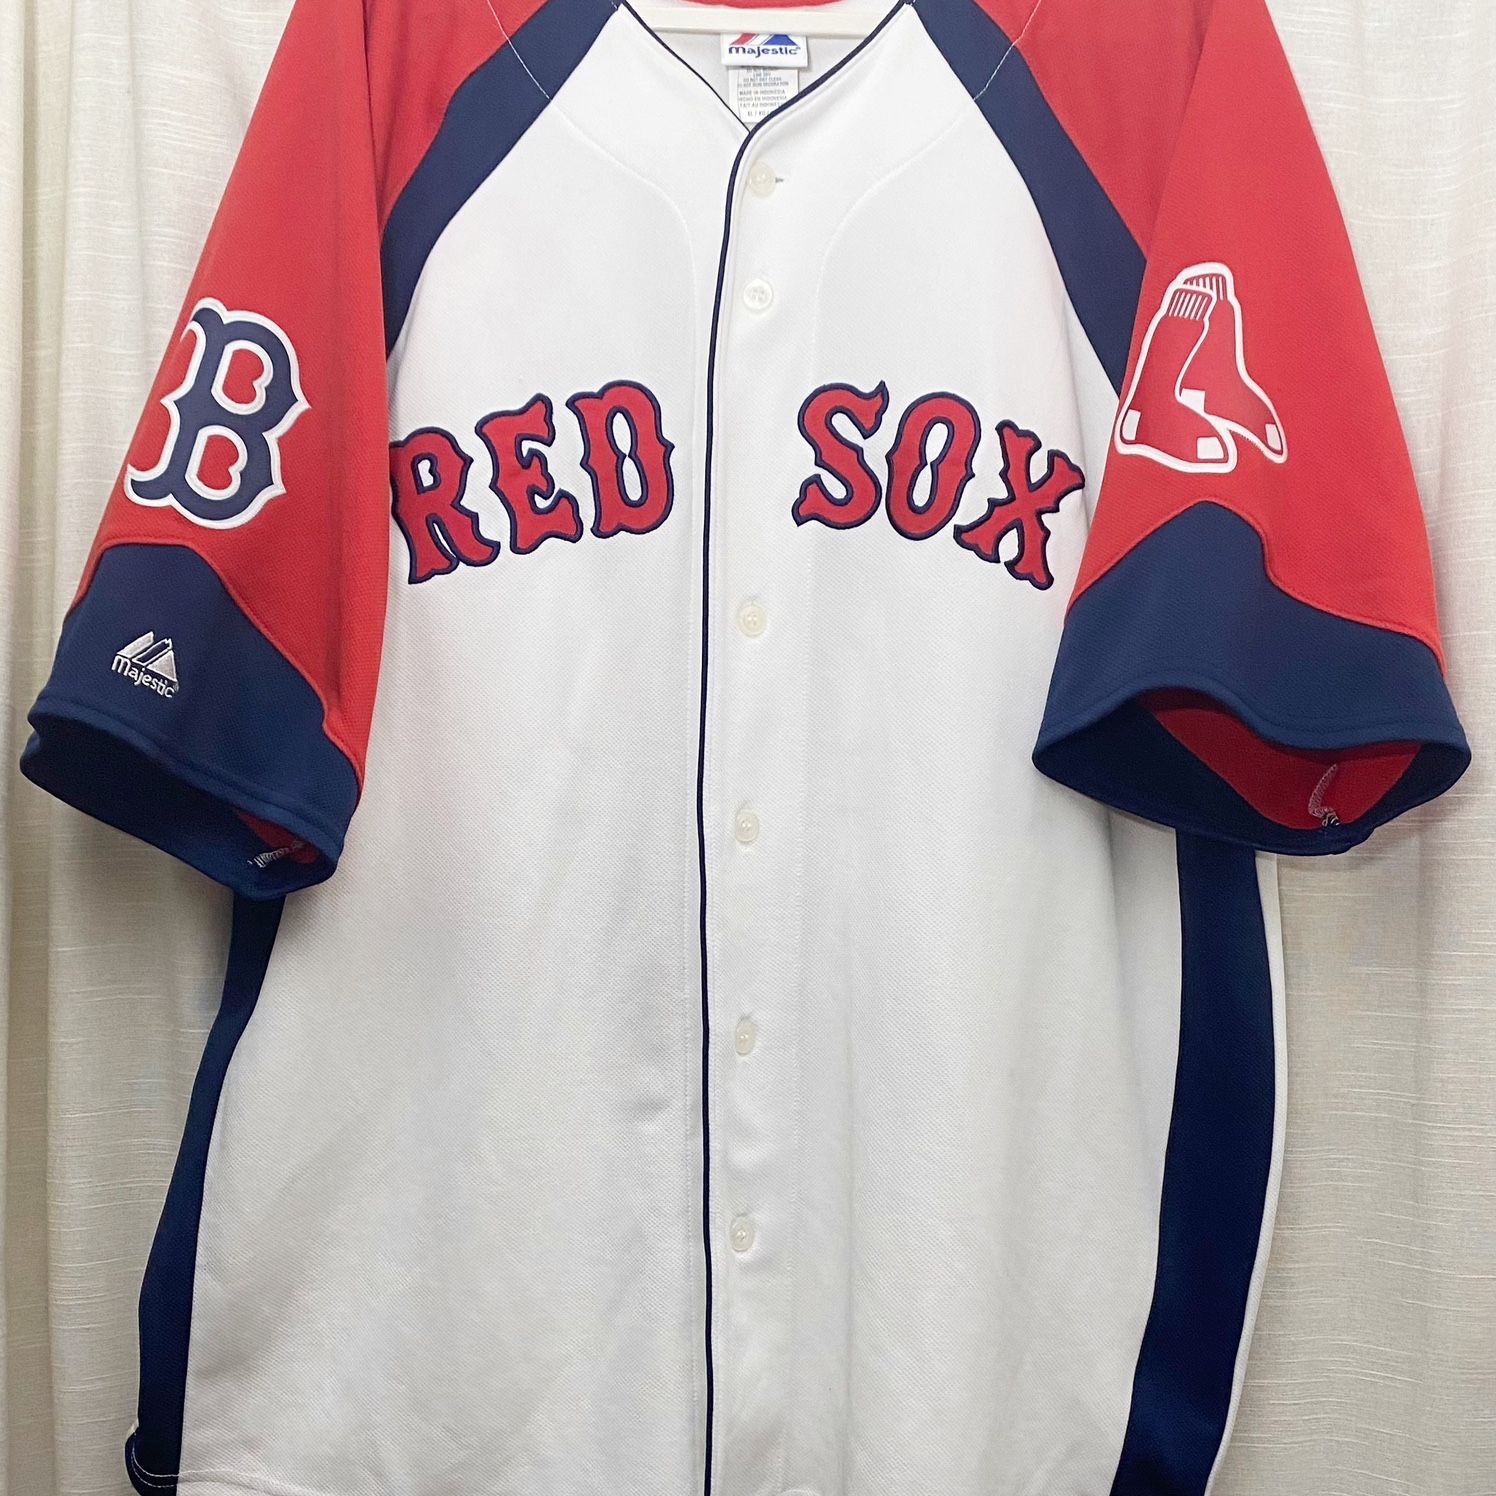 jerseys – Blogging the Red Sox